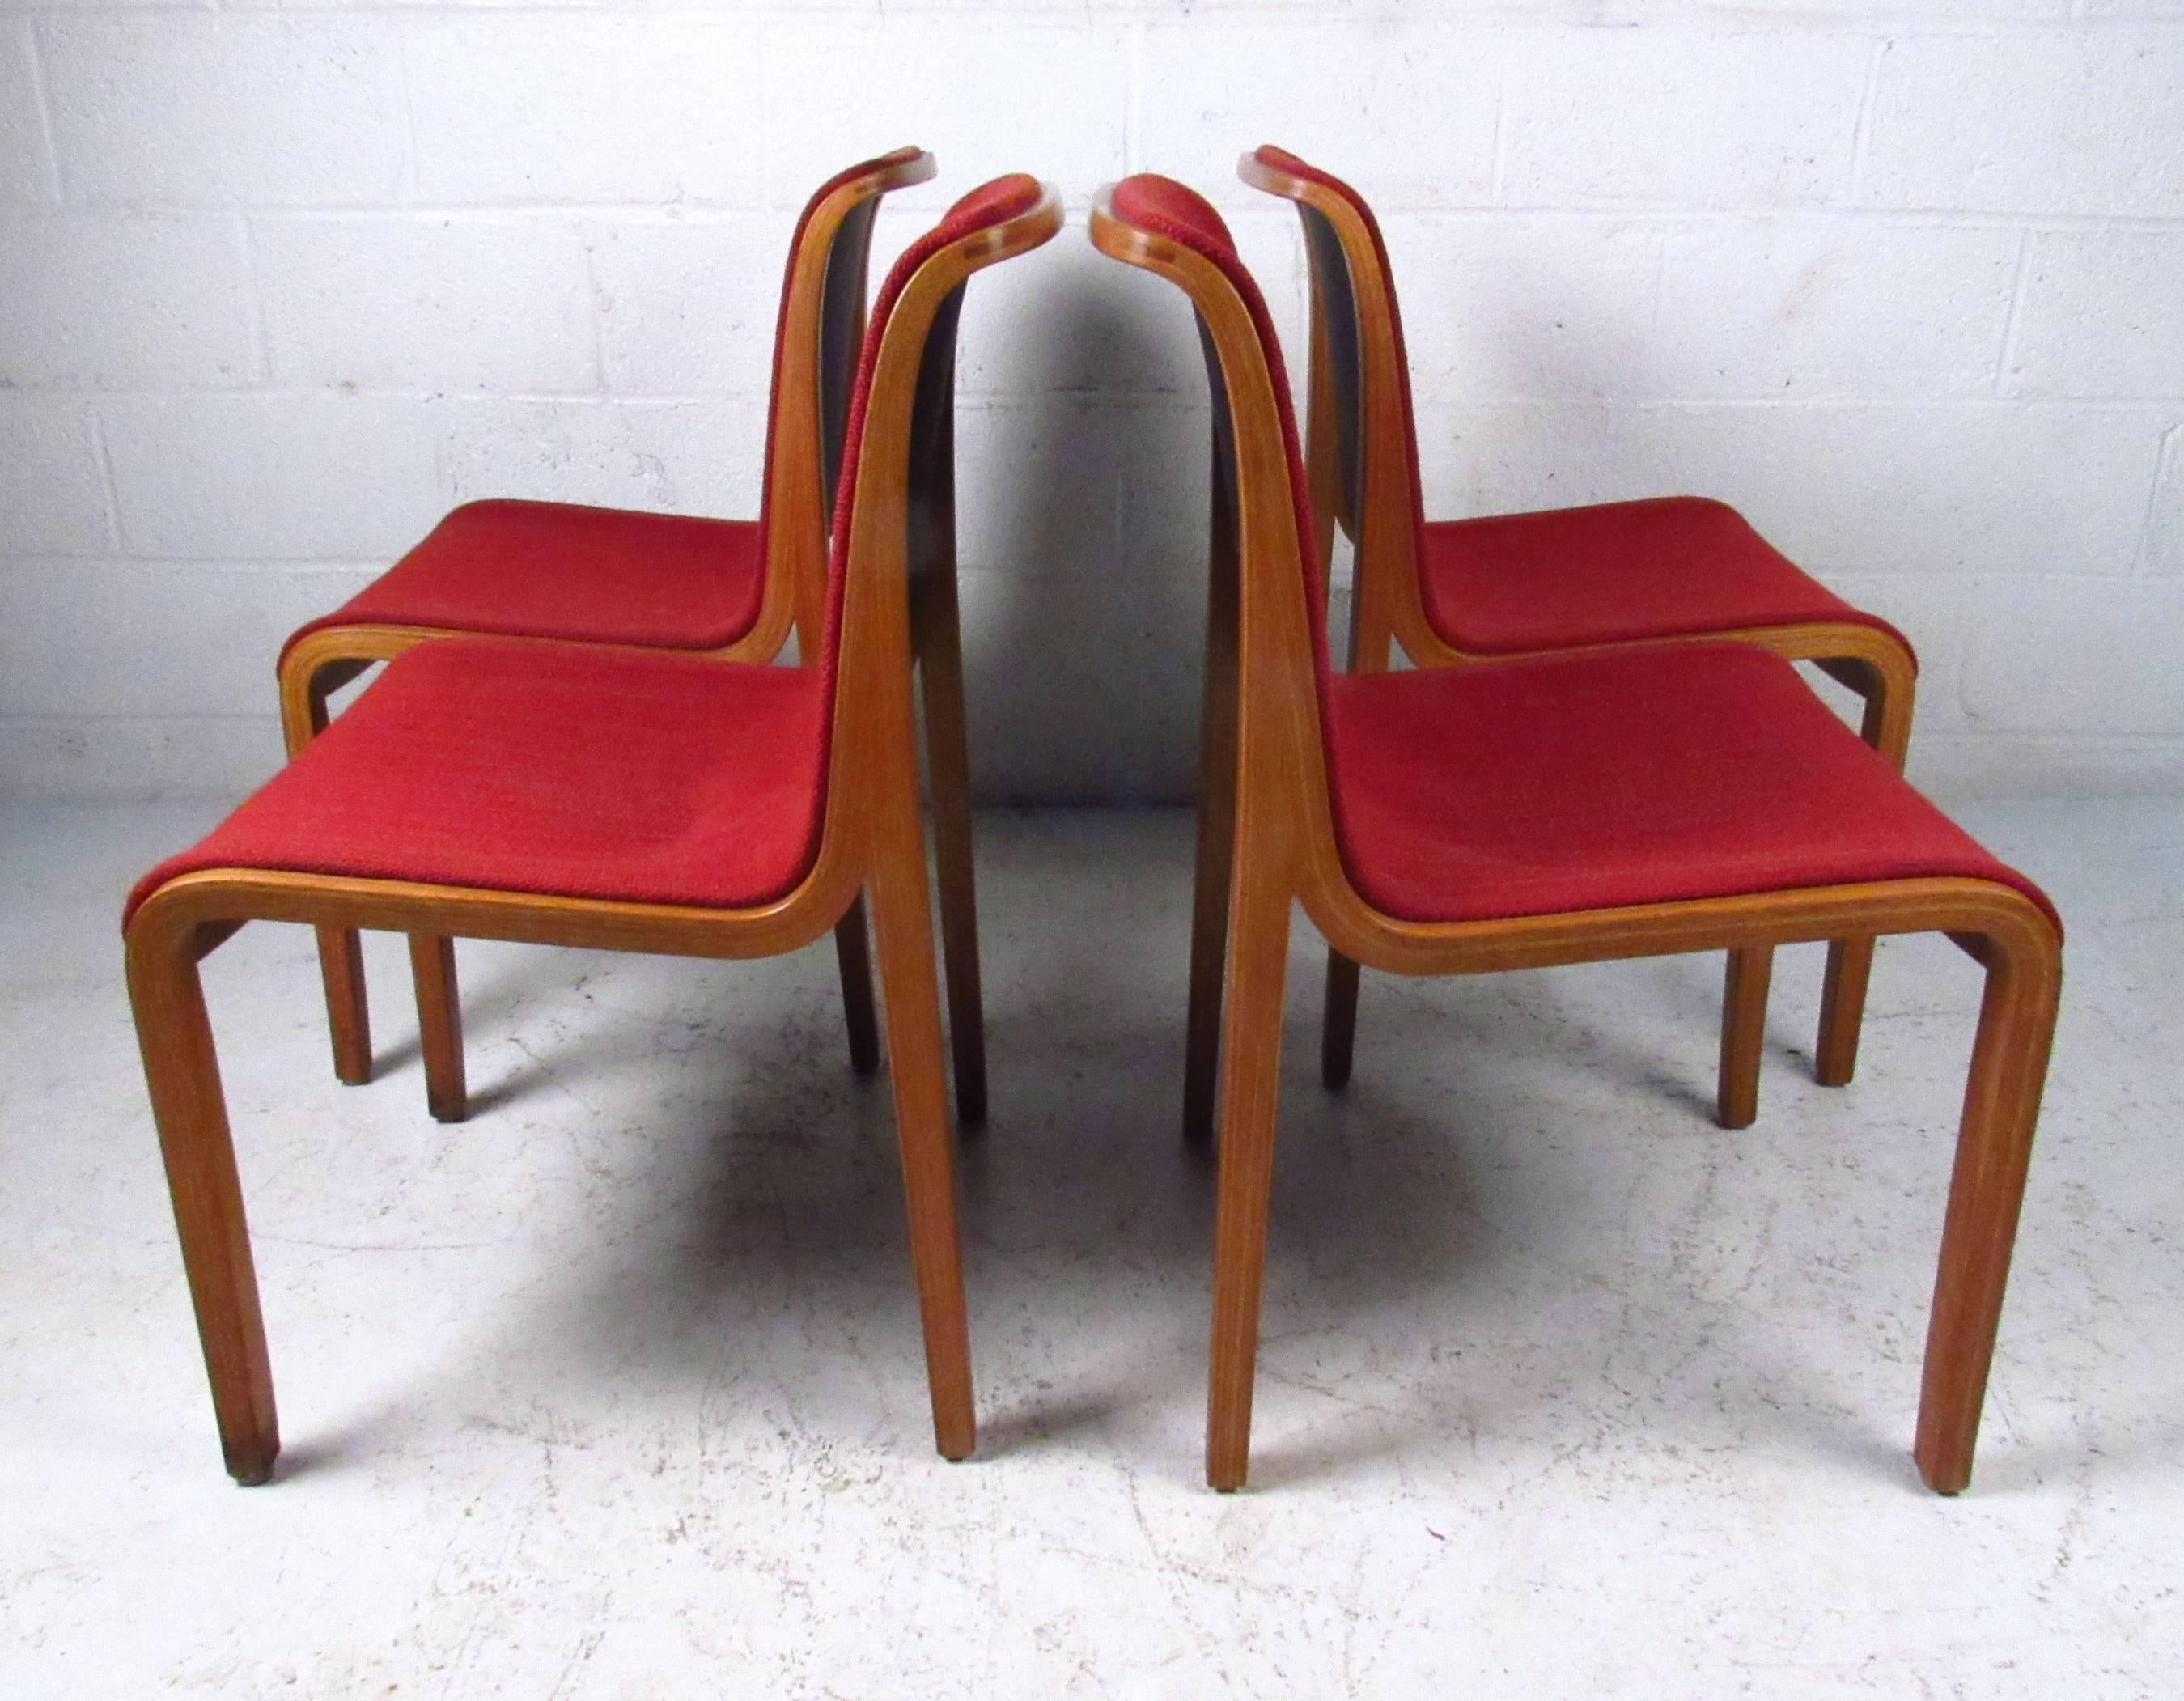 This vintage set of dining chairs features the unique style of Bill Stephens as designed for Knoll. Bentwood frames, vintage fabric, and unique shell seat backs add to the mid-century aesthetic of the set. Please confirm item location (NY or NJ). 